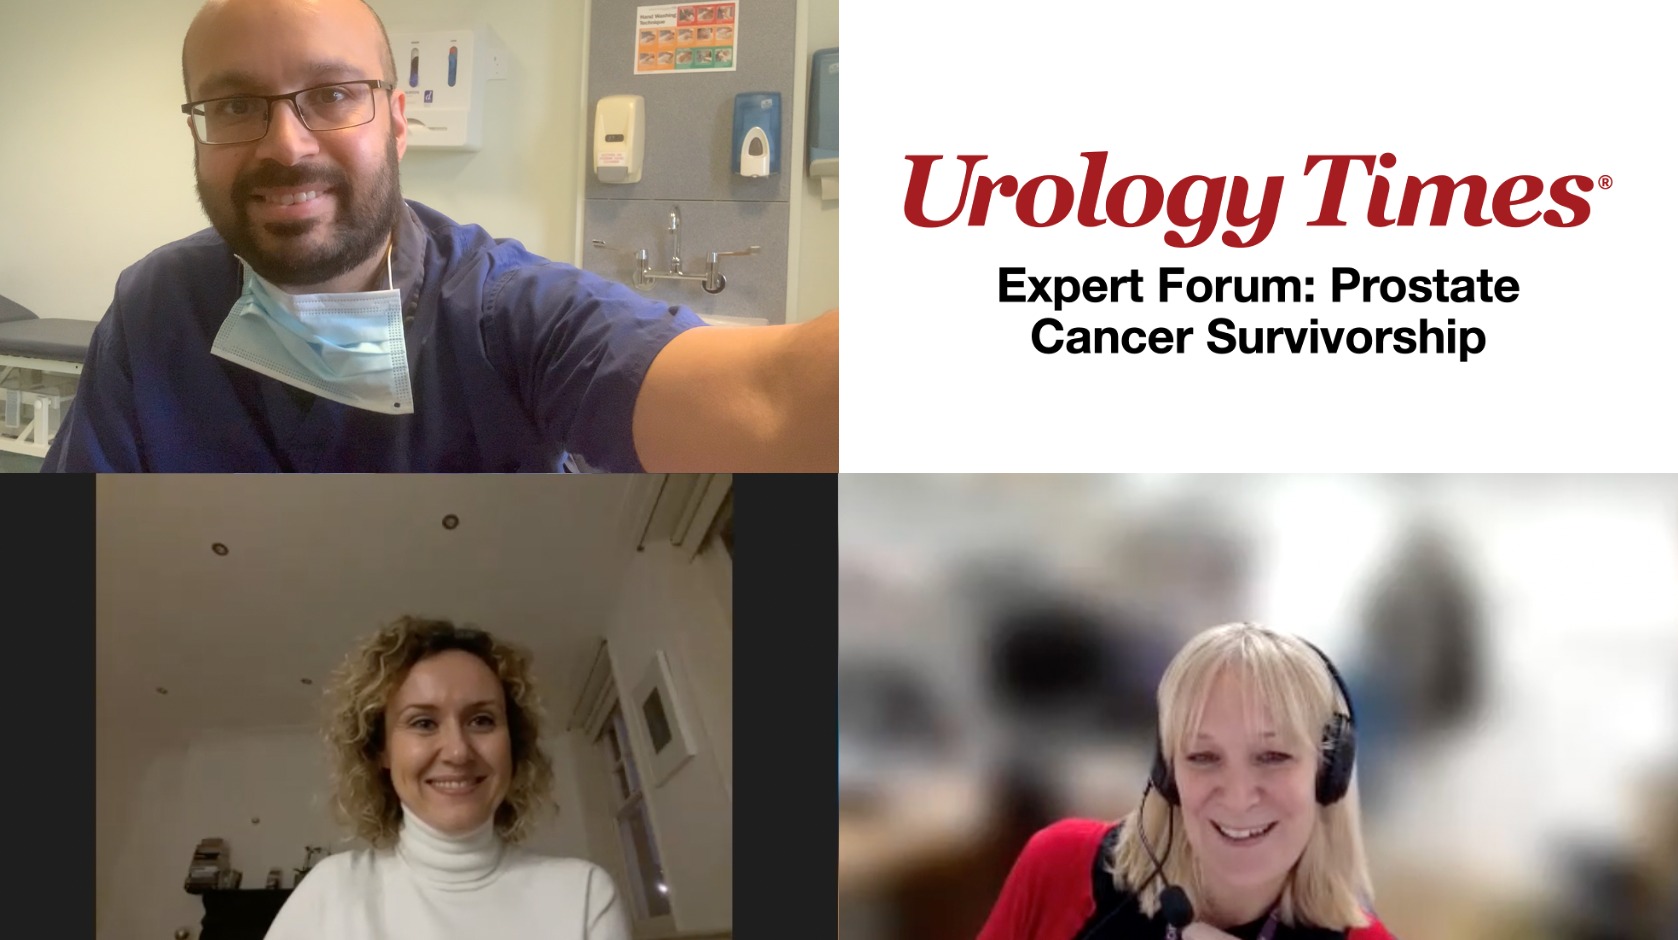 Expert forum on prostate cancer survivorship: Innovations in urinary health